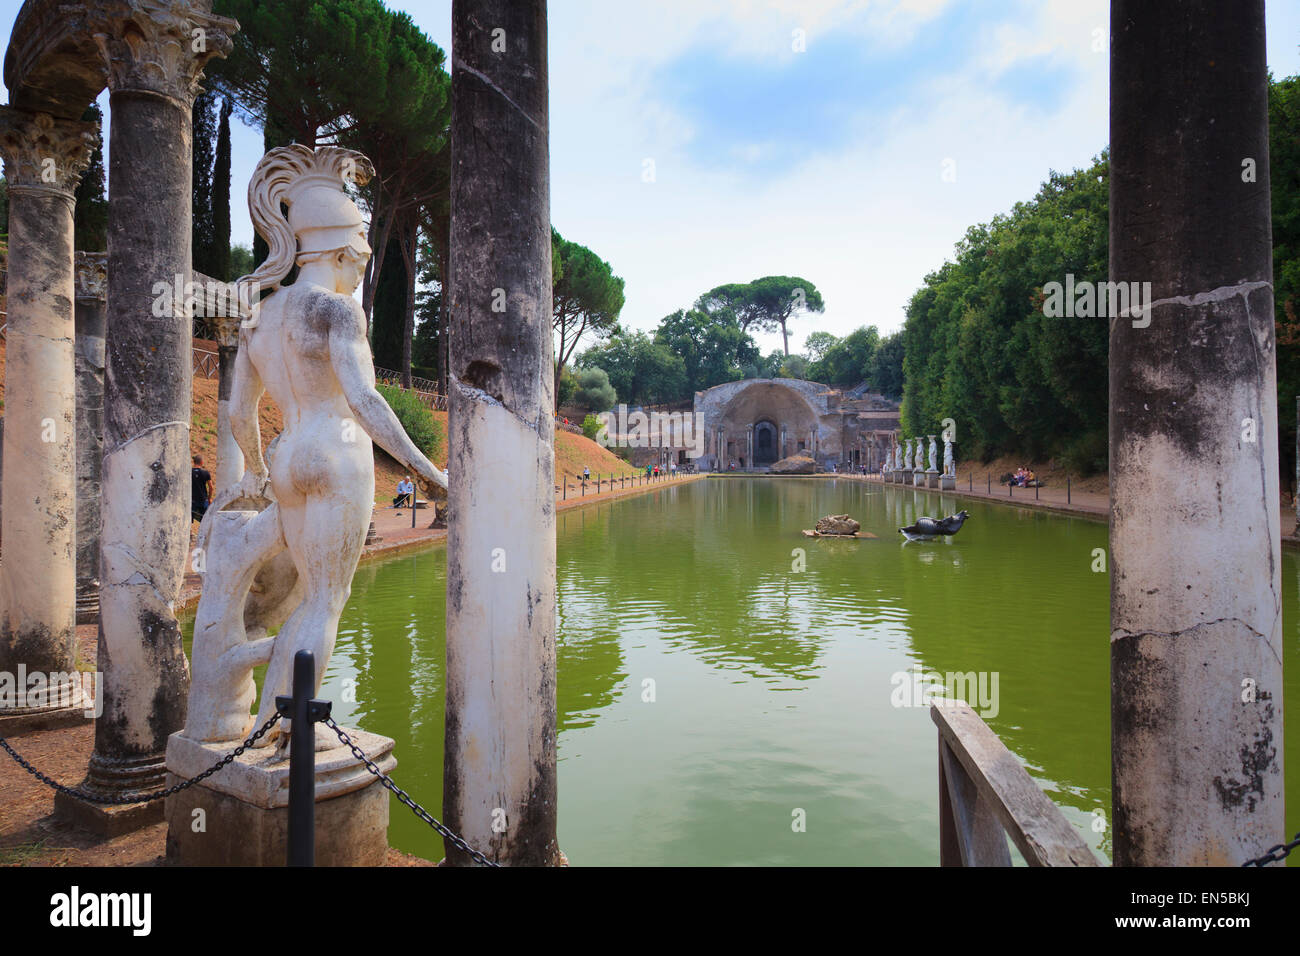 Ares - or Hermes statue and pillars of the colonnade overlooking the Canopus at Hadrian's Villa, Tivoli, Italy. Stock Photo